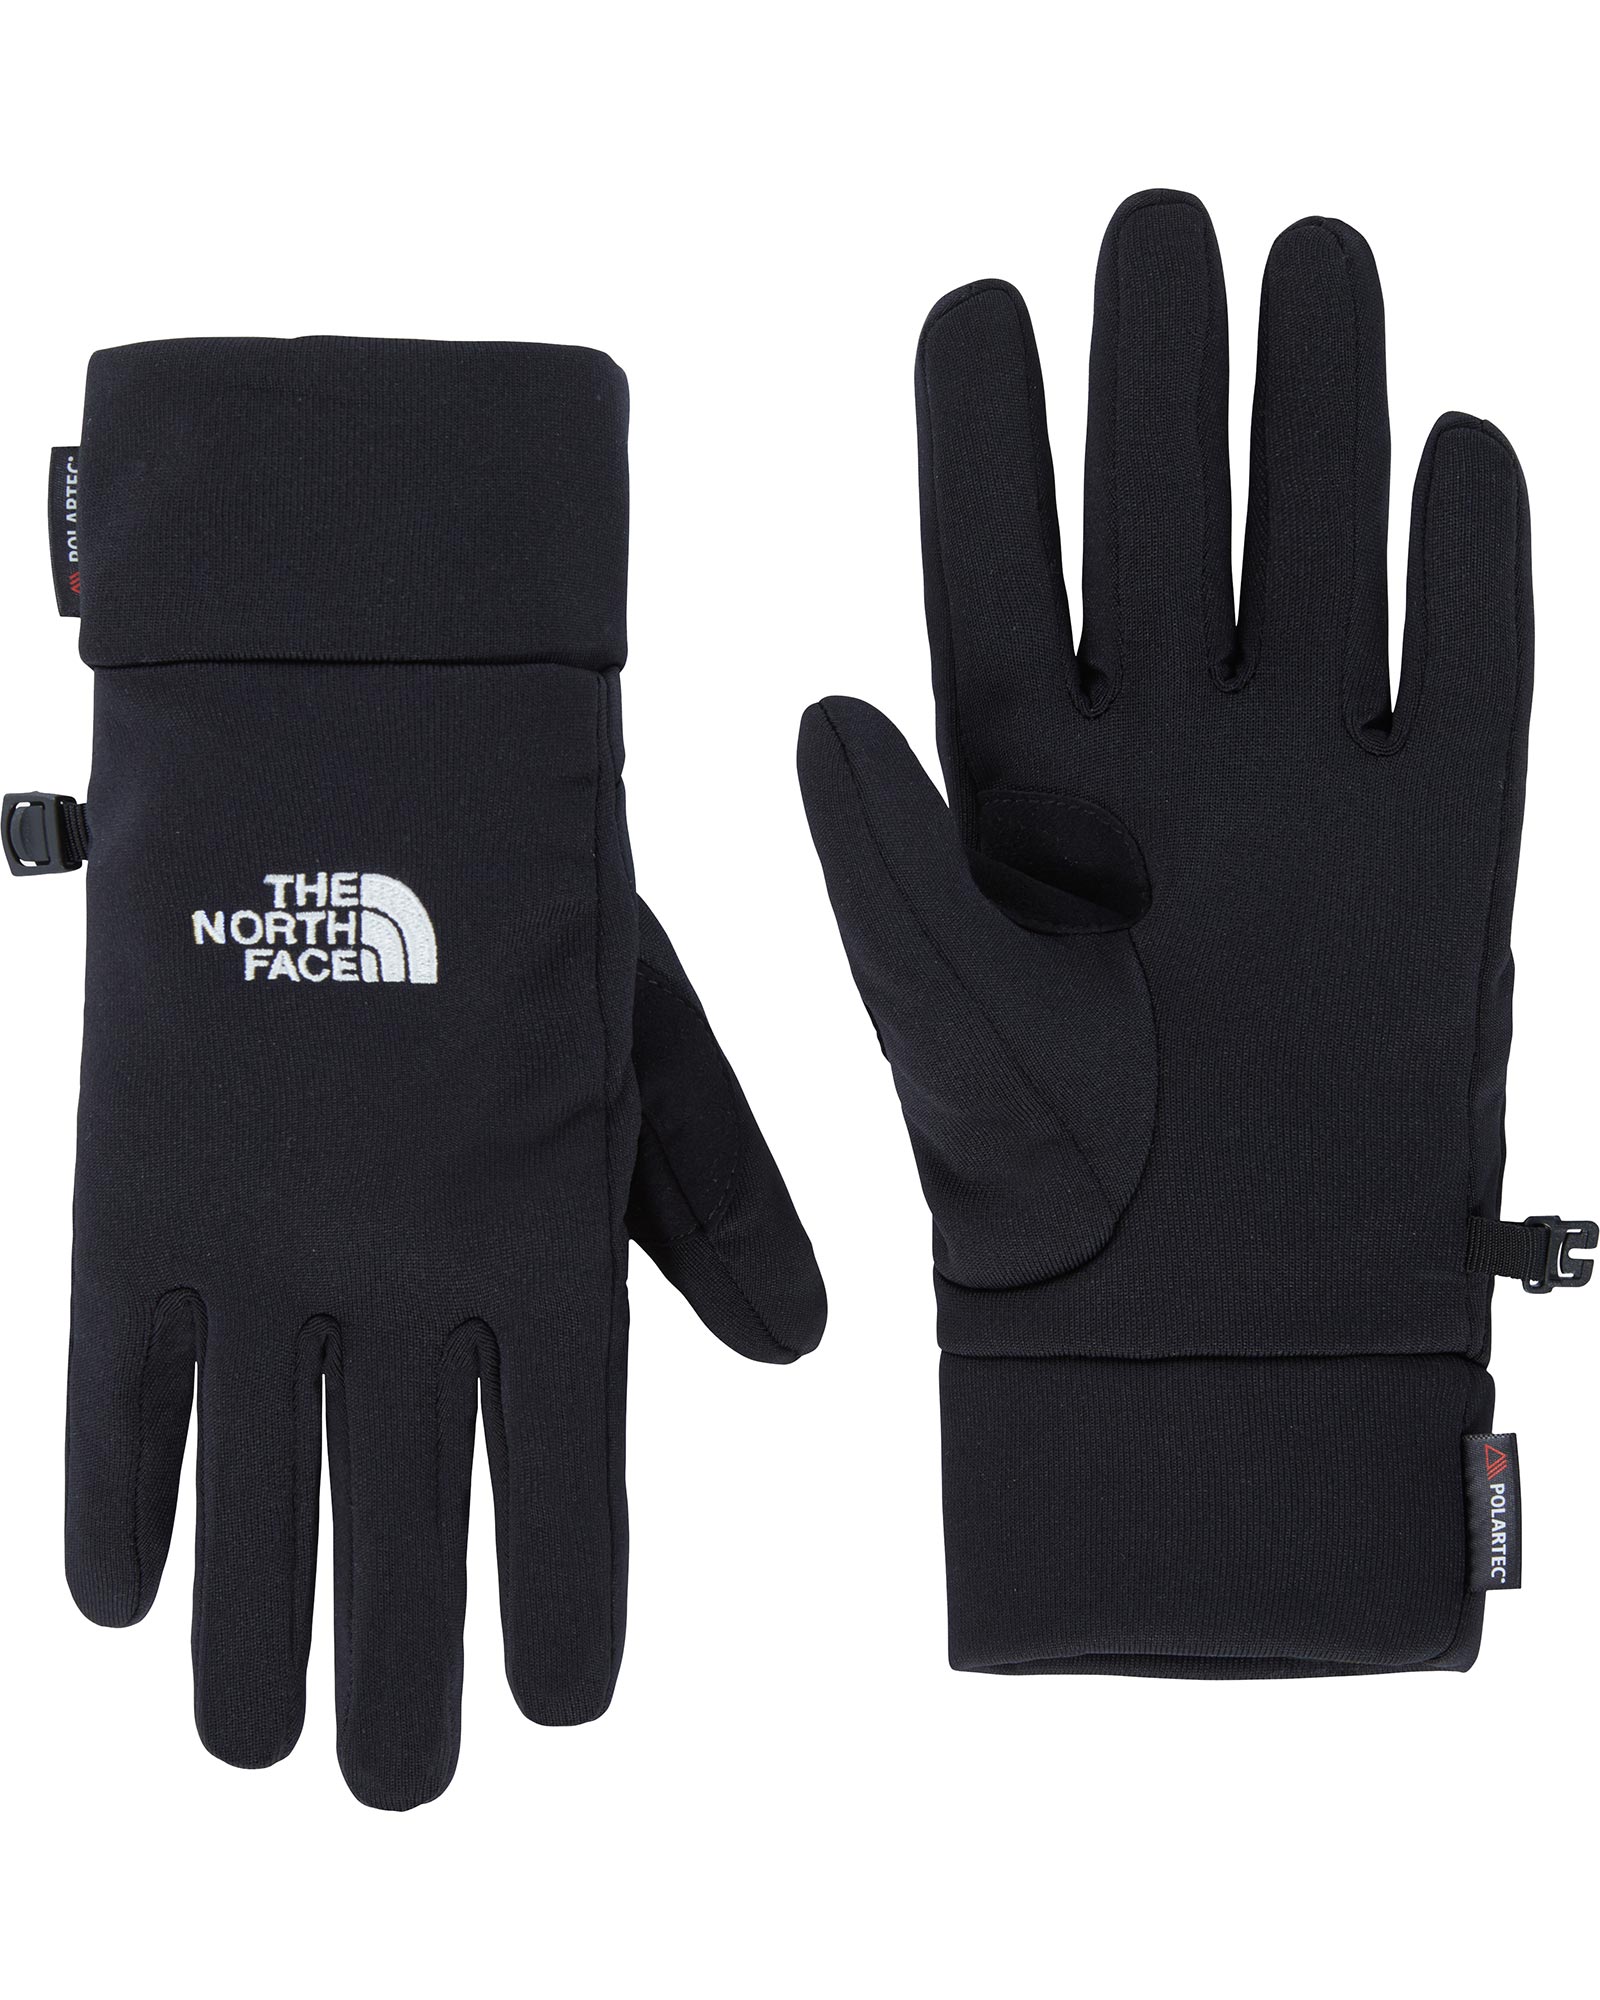 The North Face Powerstretch Men’s Gloves - TNF Black S